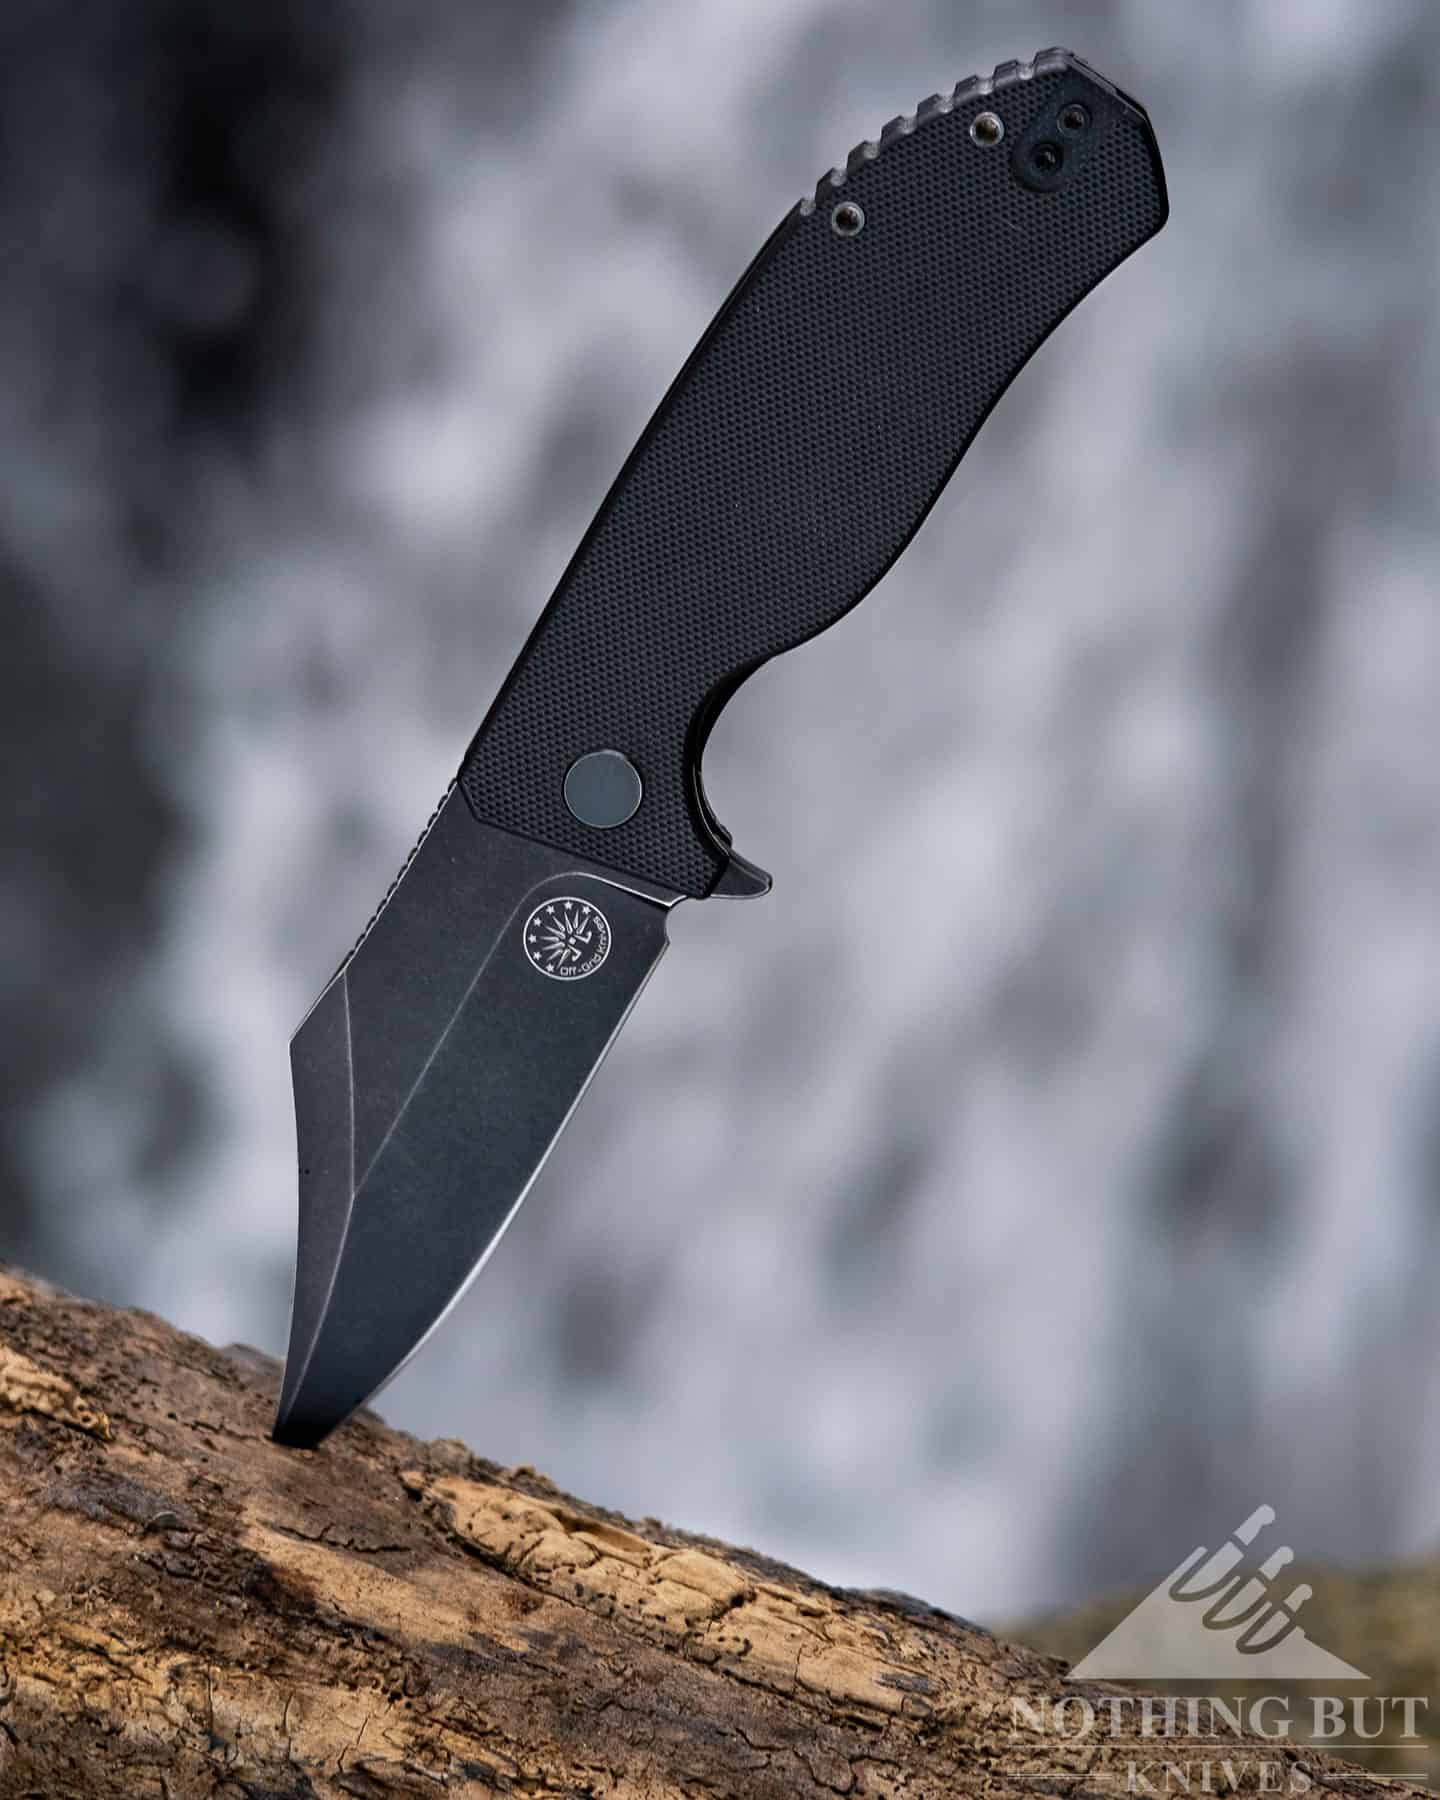 The Off-Grid Caiman with a D2 steel blade in the open position in front of a waterfall.